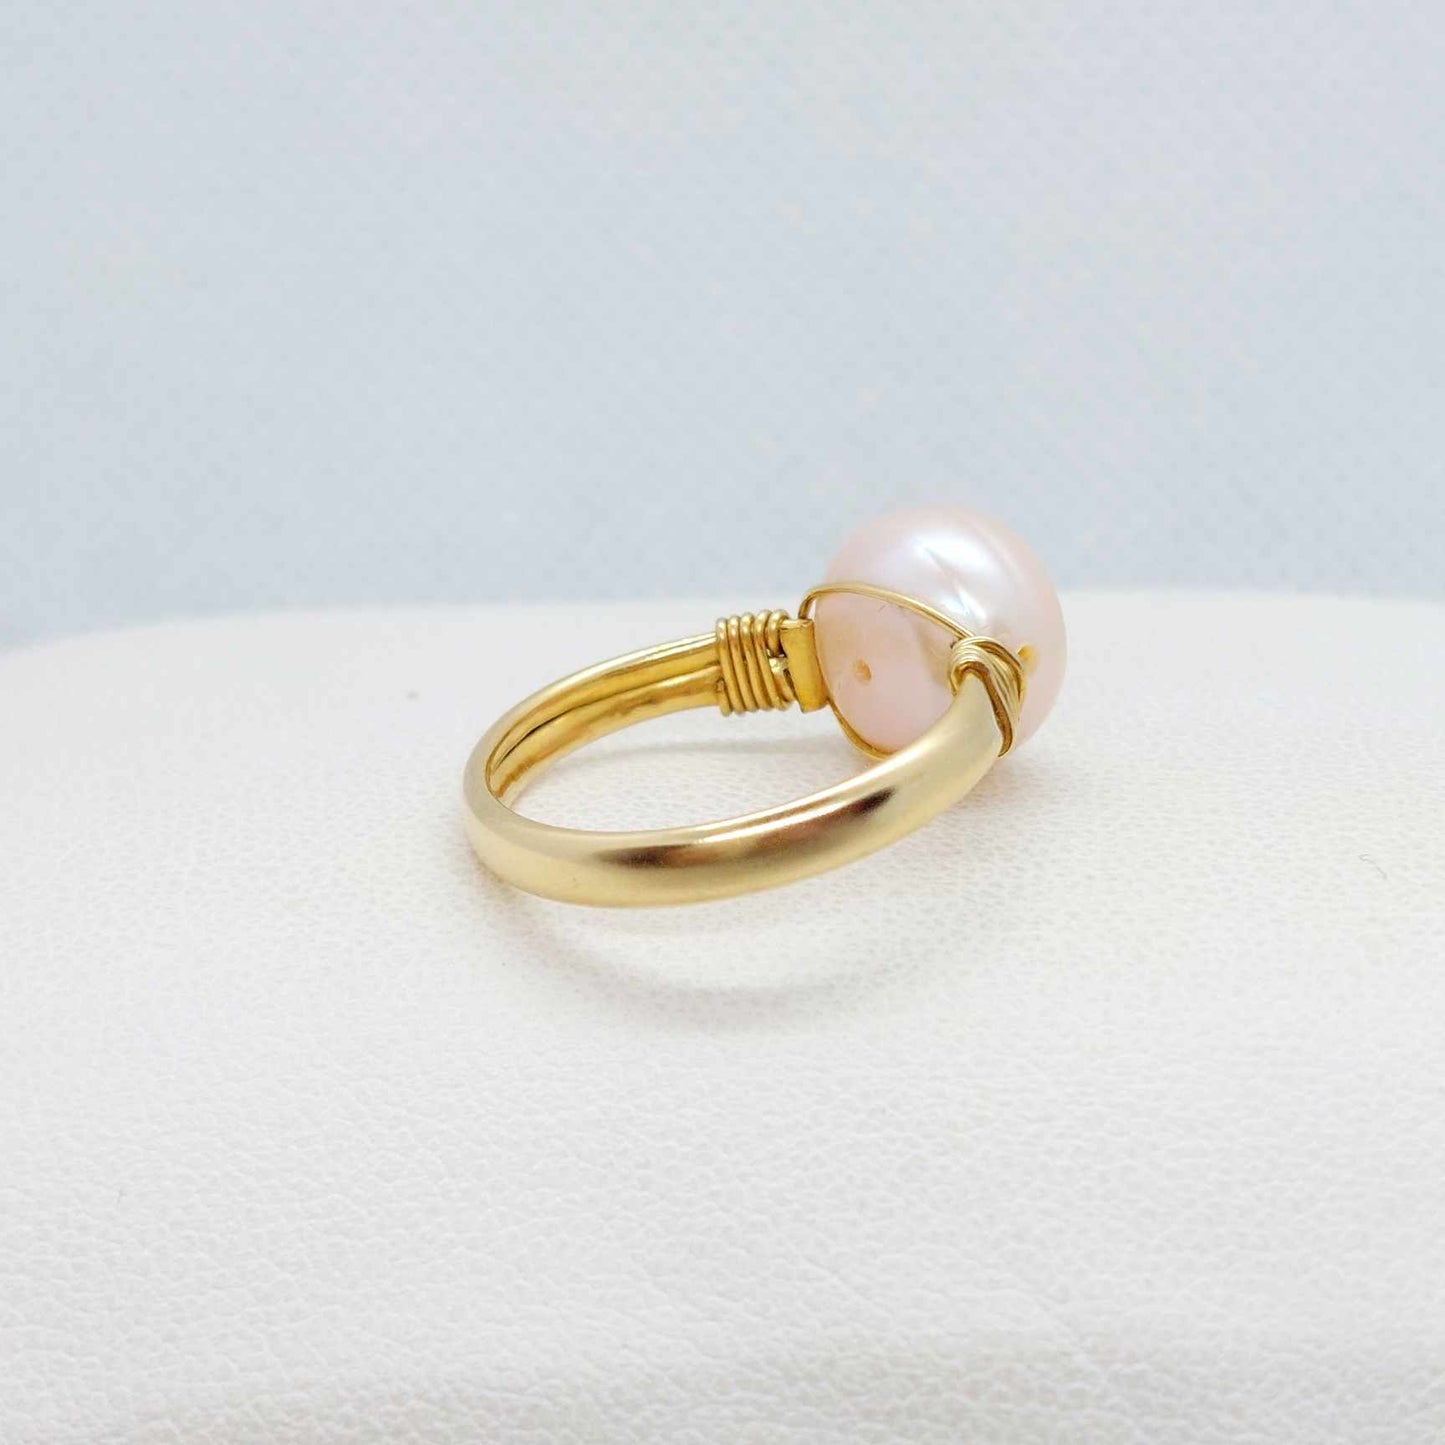 Natural Peach Pearl Ring with 12mm Stone in Solid 10K Gold